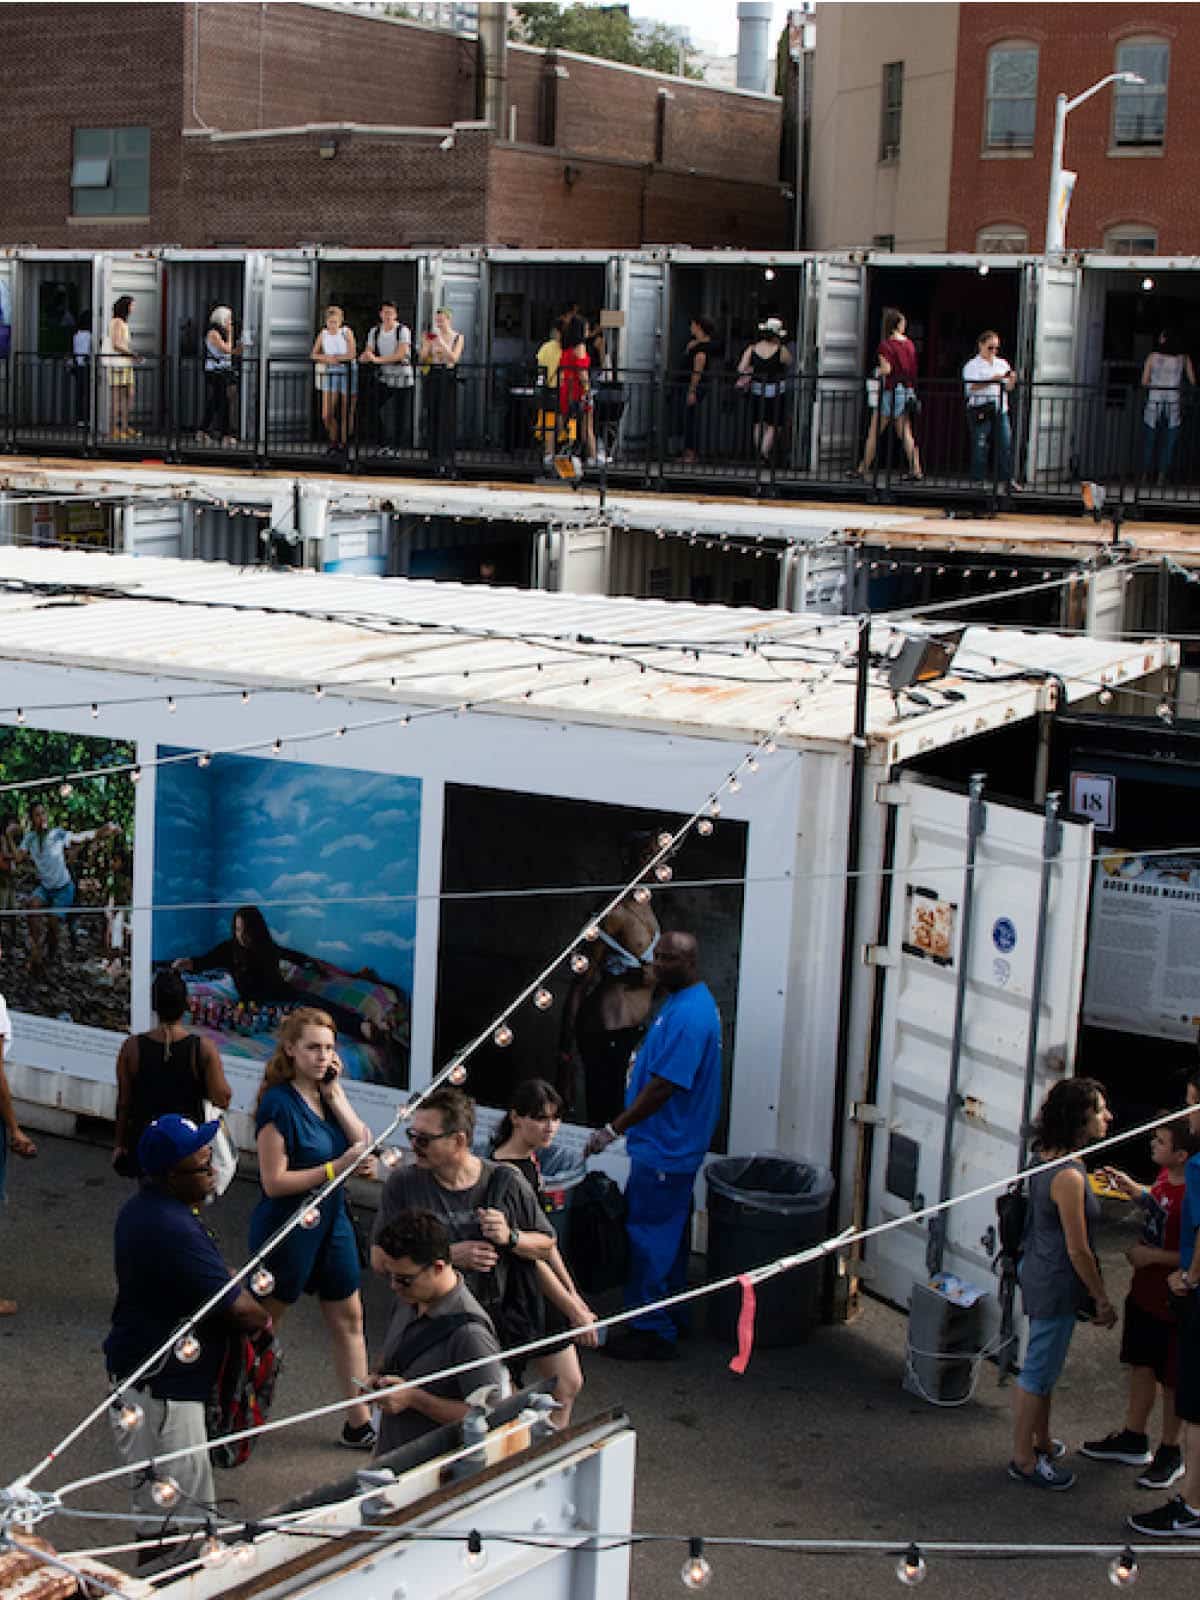 Overhead view of shipping containers displaying photos as a part of the Photoville exhibition.